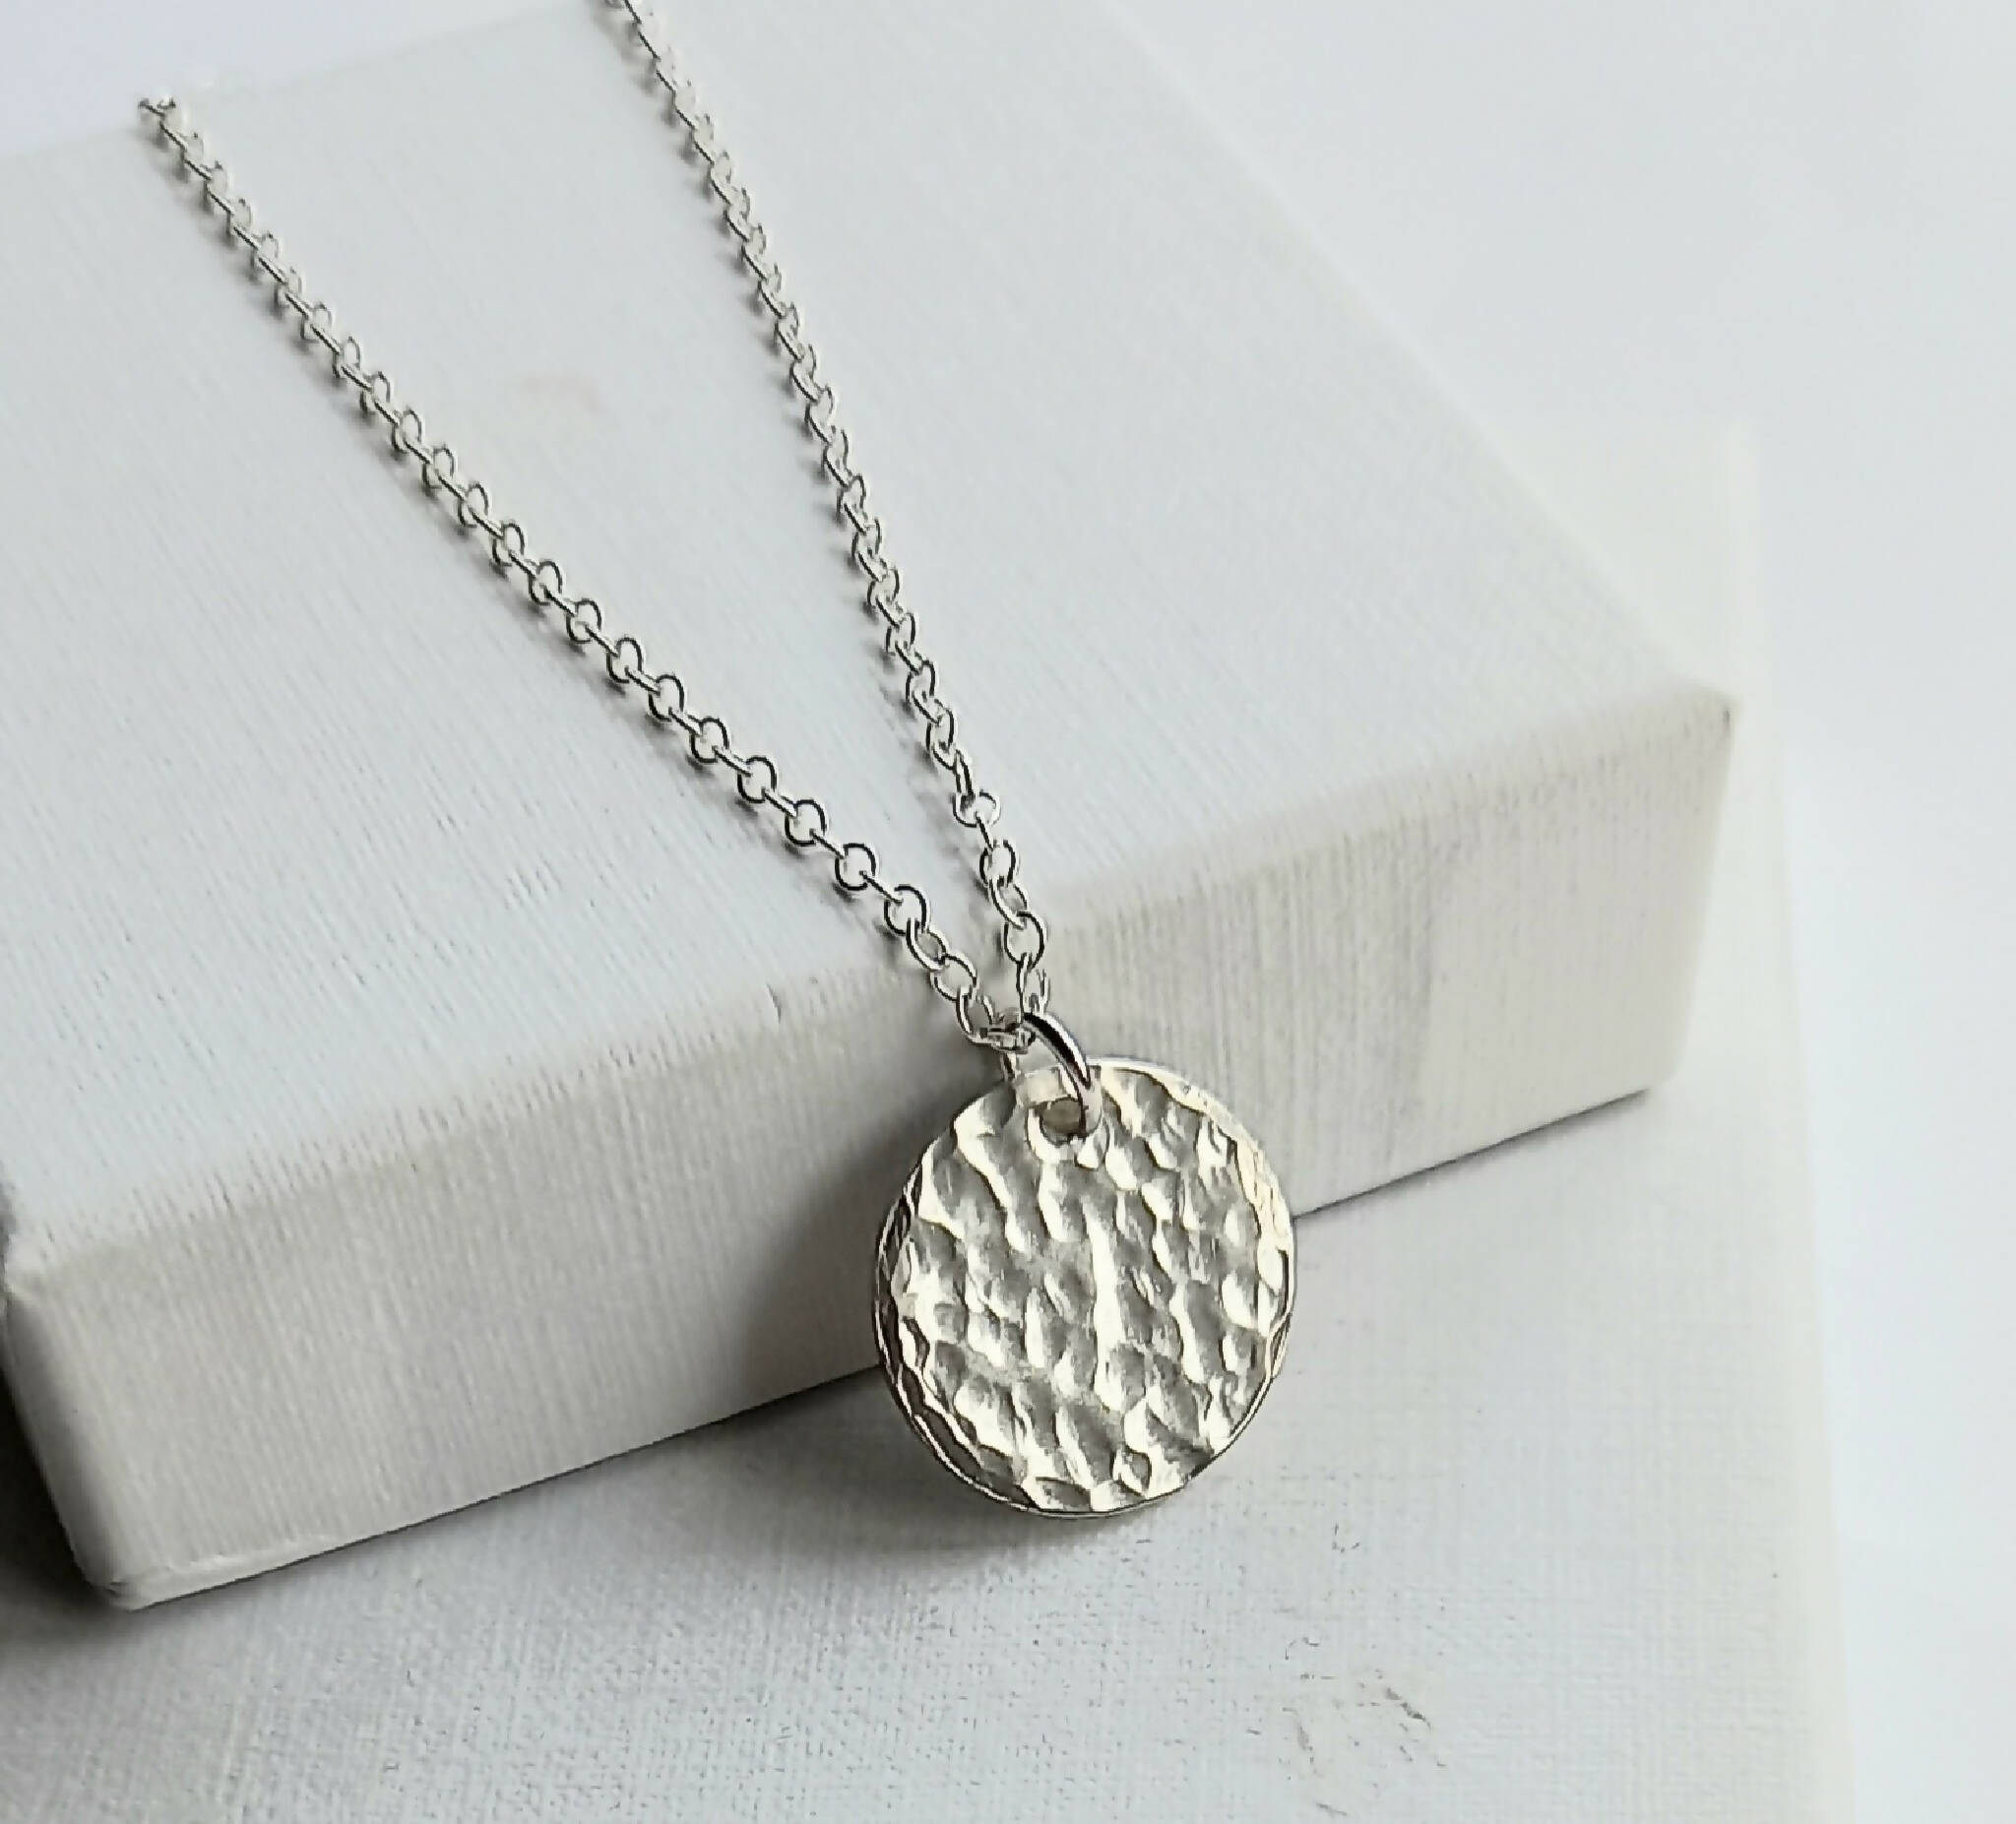 Hammered silver necklace